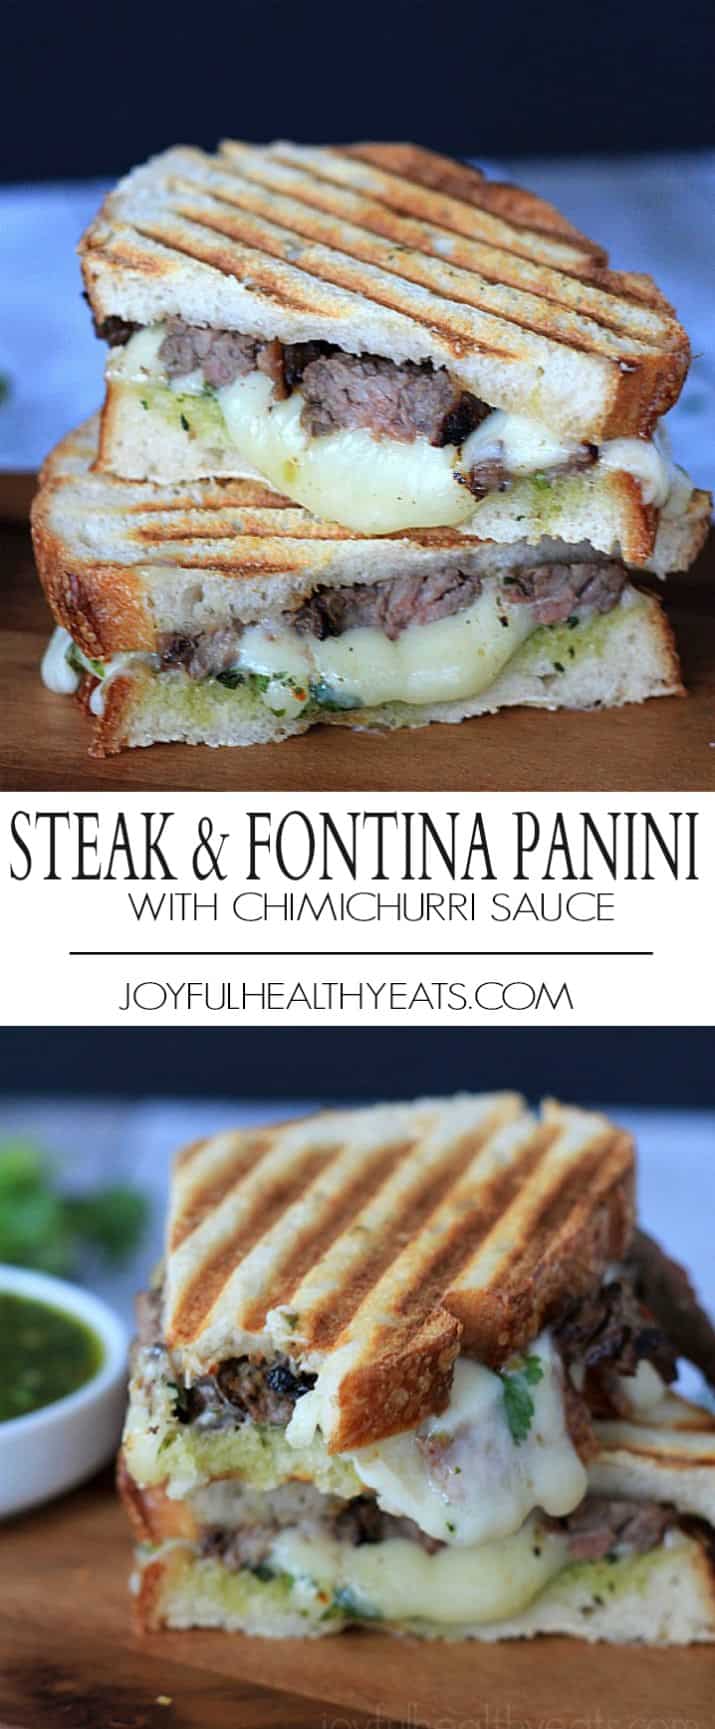 An amped up sandwich recipe using Grilled Fajita Steak, fontina cheese, and topped with a spicy fresh herb Chimichurri sauce for the ultimate Panini! | joyfulhealthyeats.com 